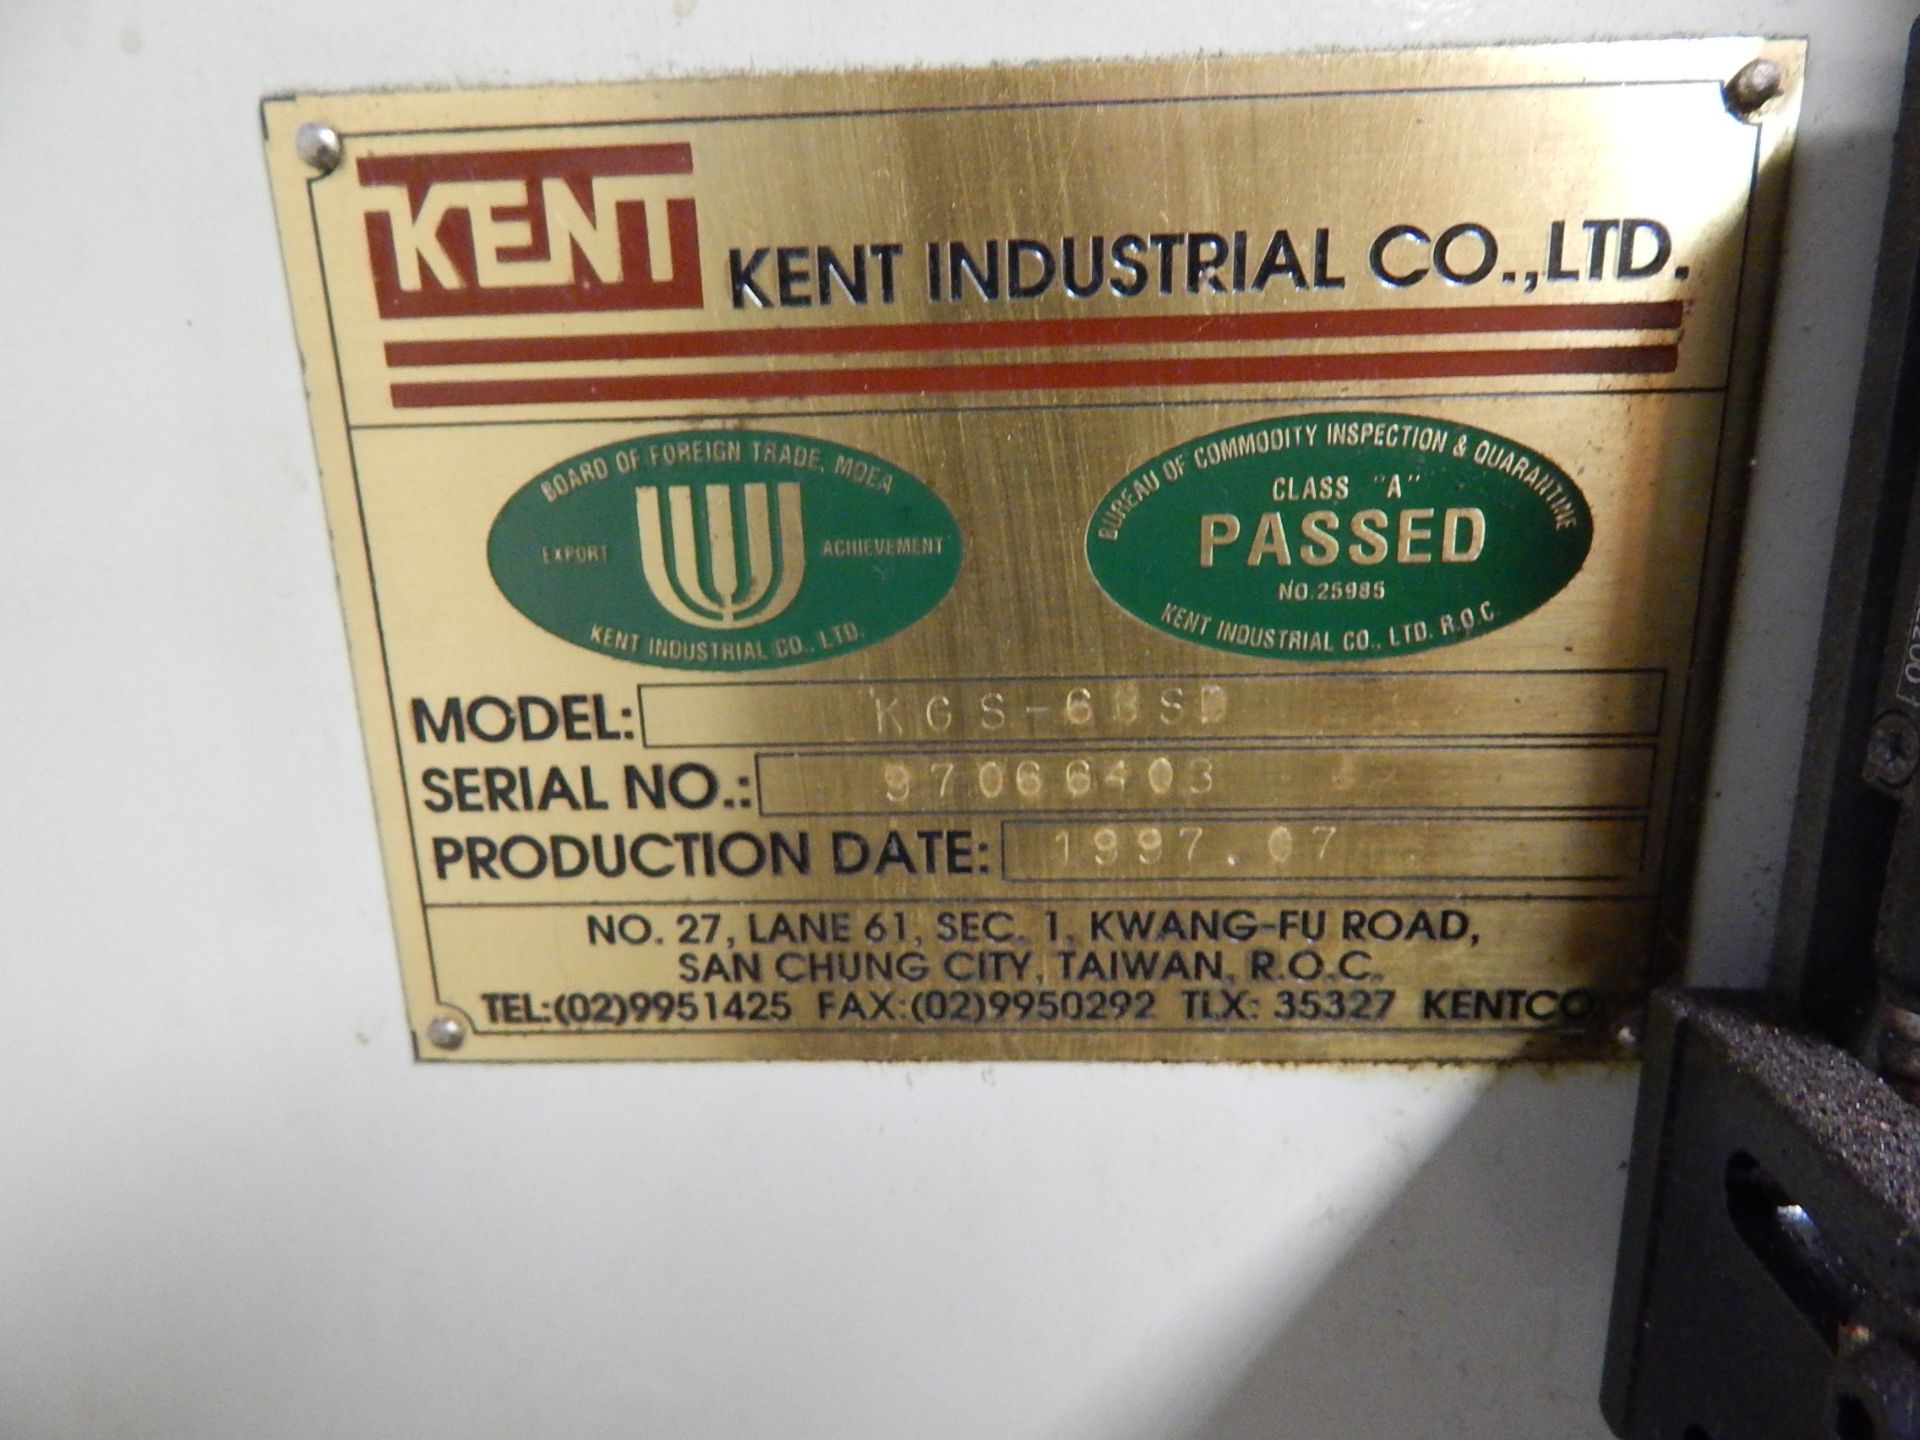 Kent Model KGS-63SD, 2-Axis Hydraulic Surface Grinder, s/n 97066403, New in 1997, 12 In. X 24 In. - Image 11 of 11